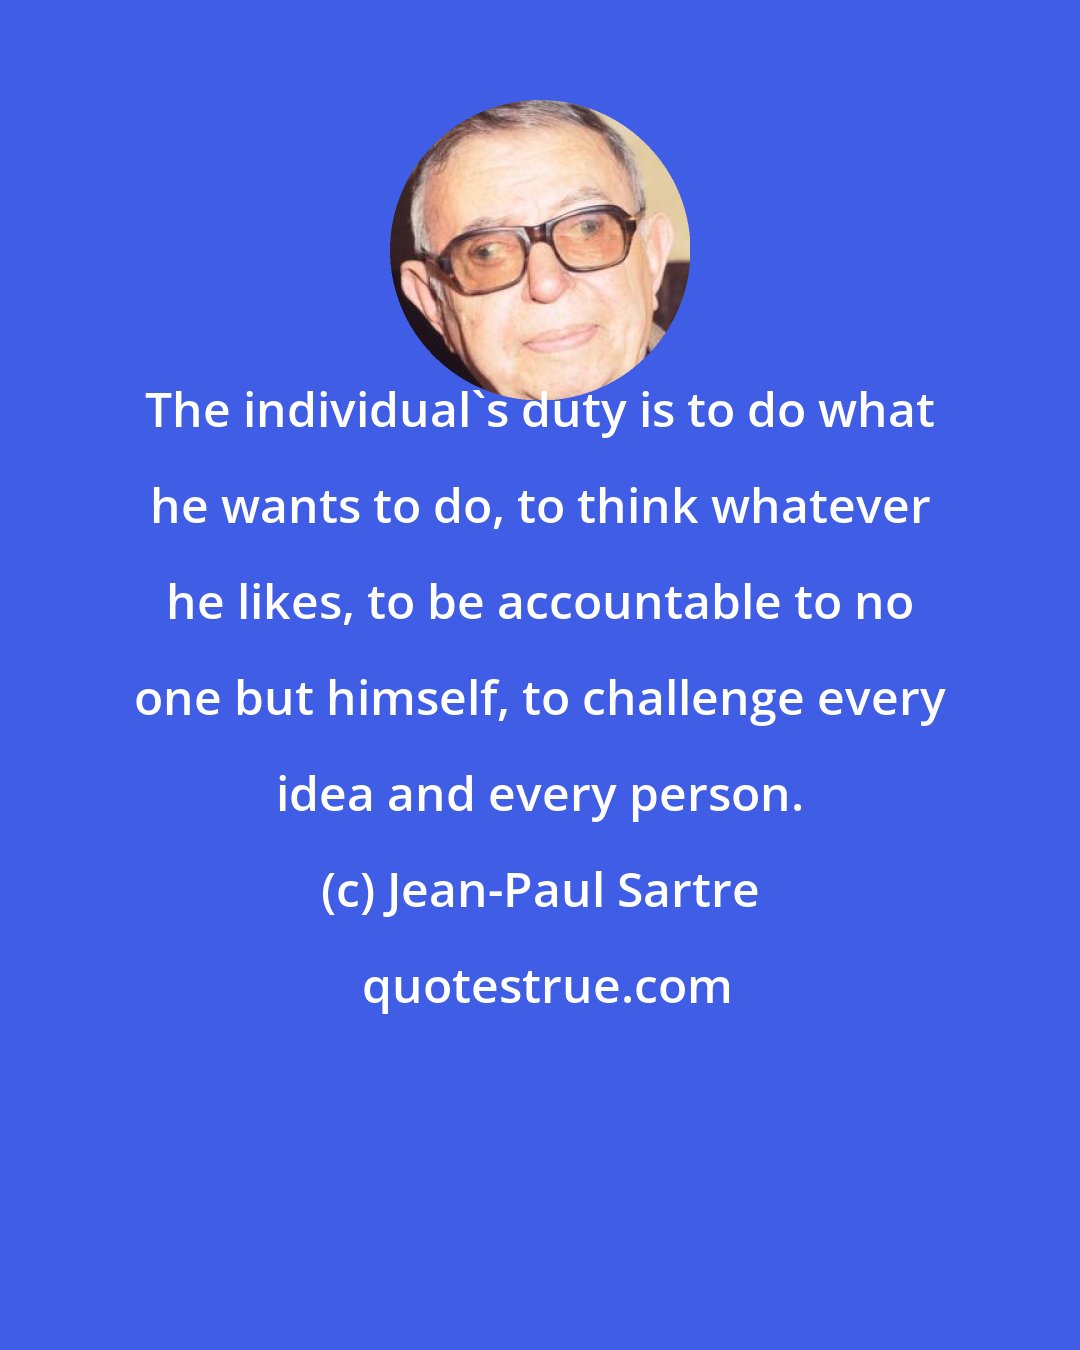 Jean-Paul Sartre: The individual's duty is to do what he wants to do, to think whatever he likes, to be accountable to no one but himself, to challenge every idea and every person.